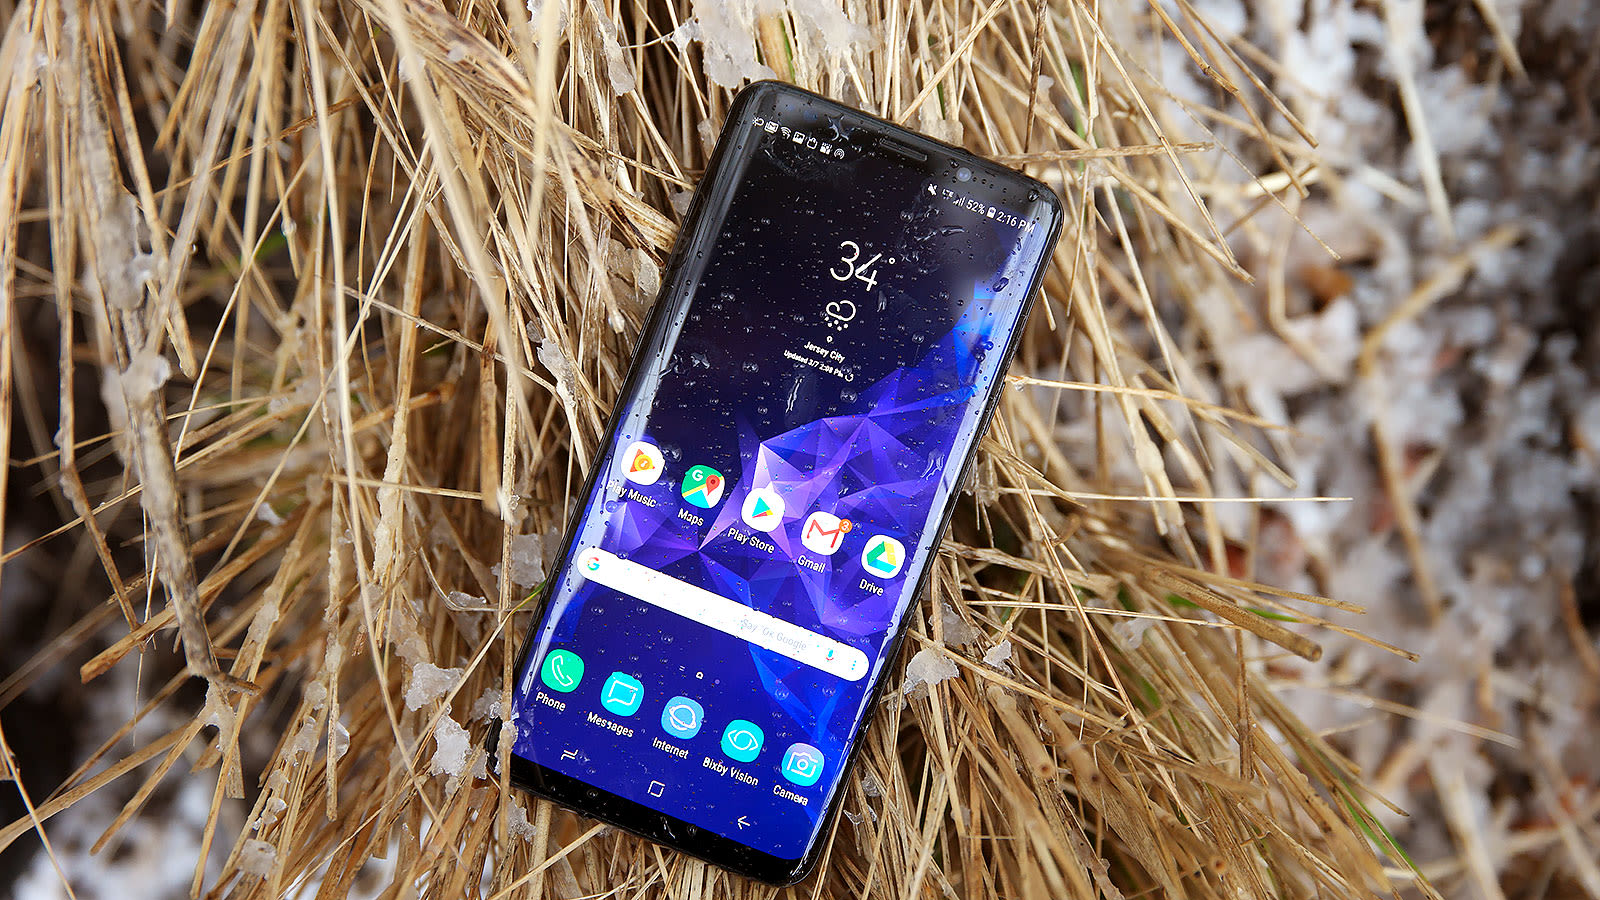 Samsung Galaxy S9 review round-up: Another solid showing for Samsung